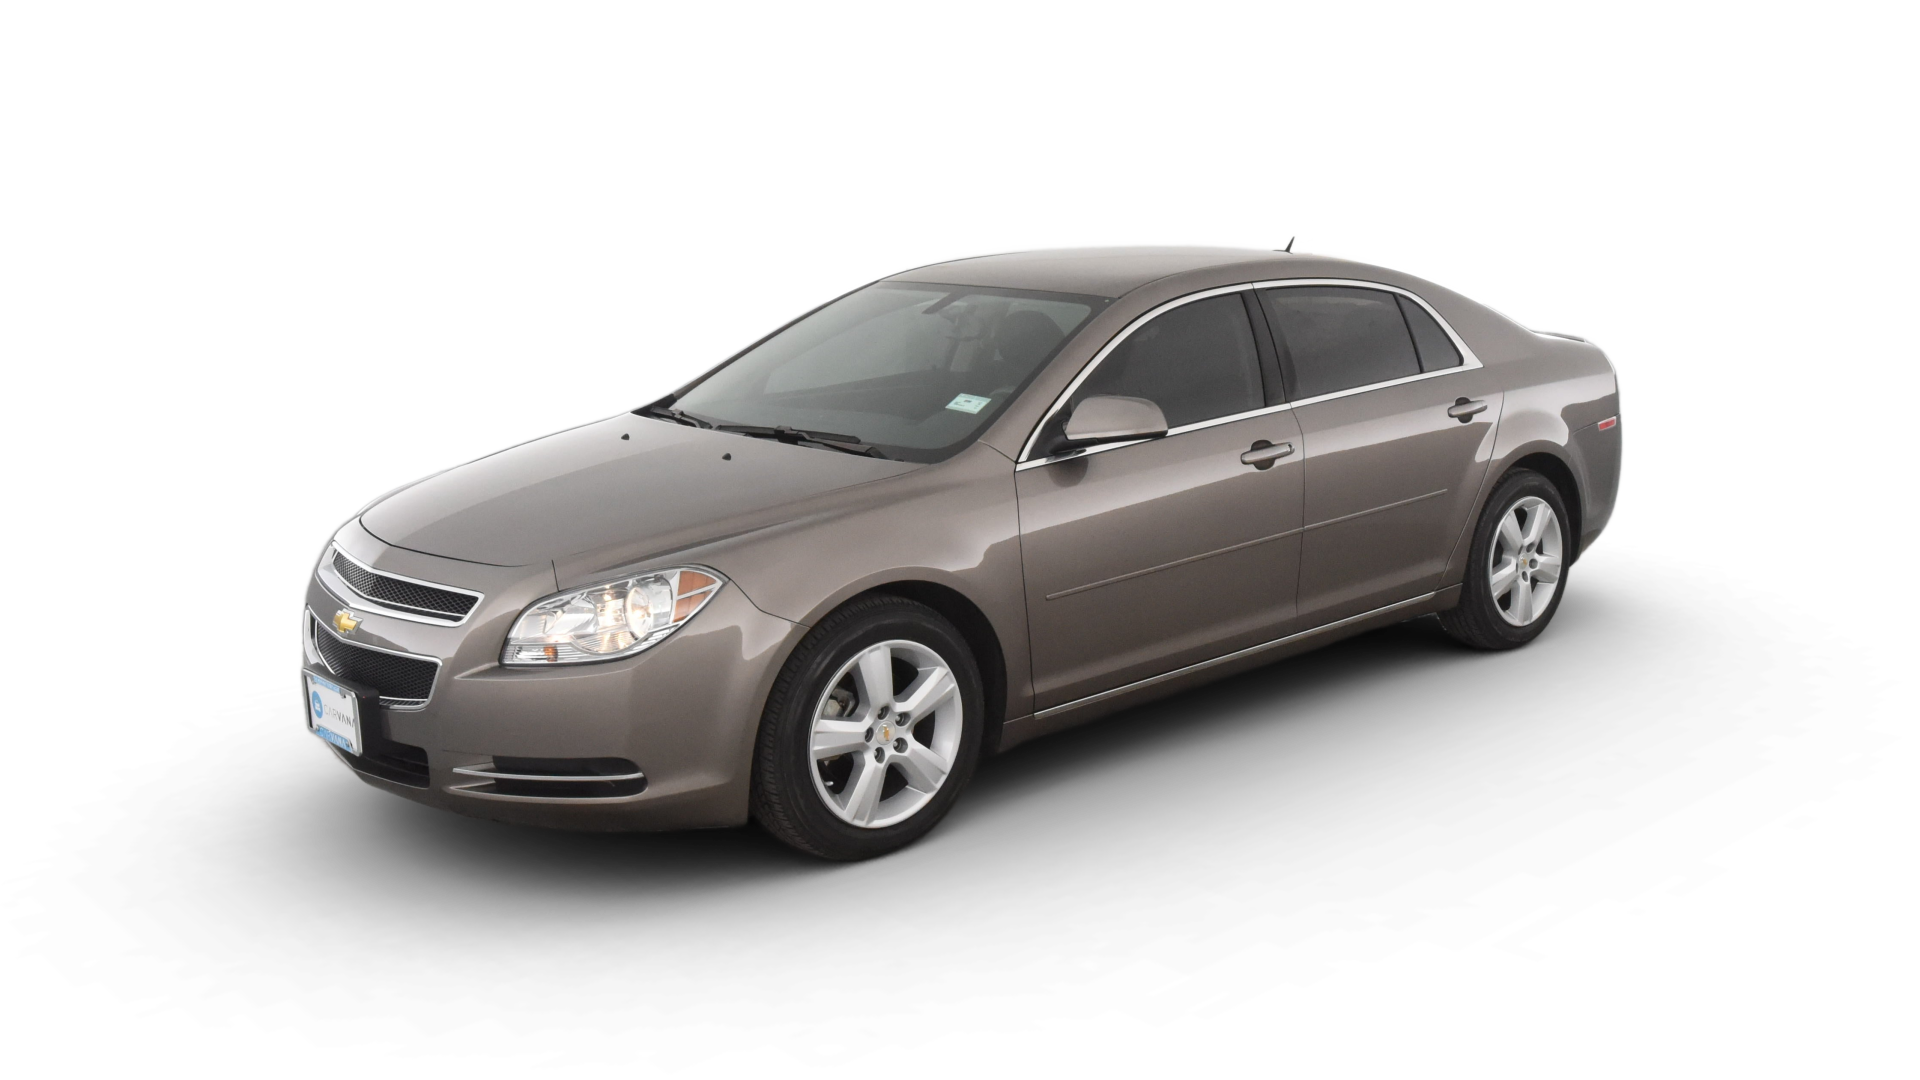 Used Chevrolet Malibu for sale in Brentwood, TN | Carvana